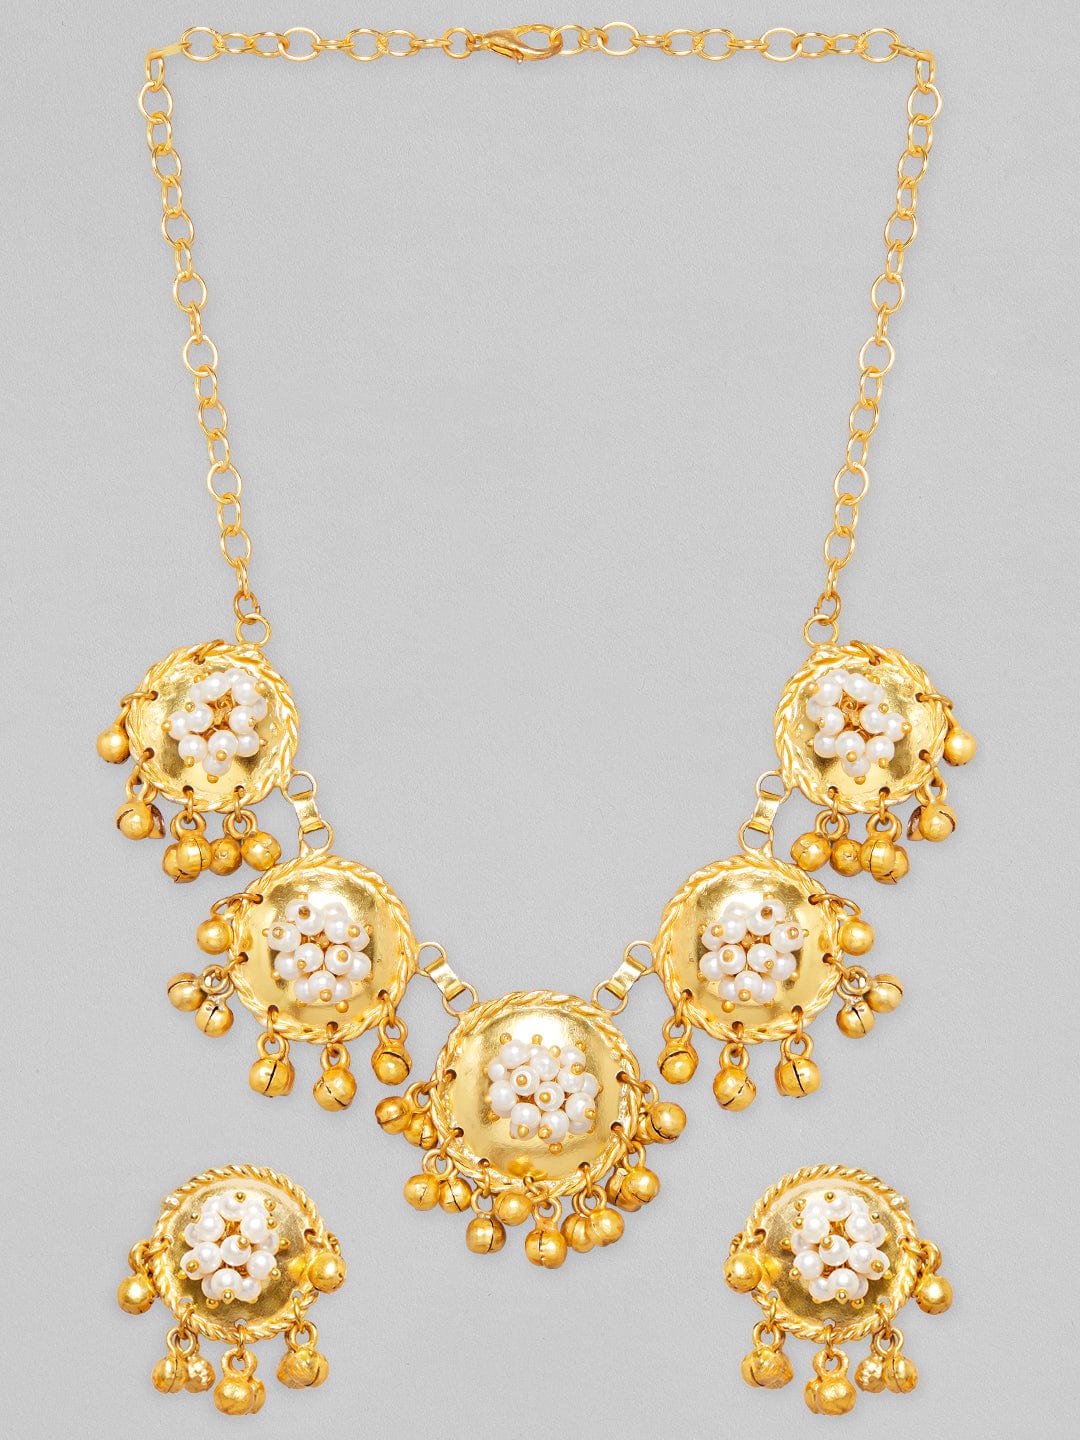 Rubans 24K Gold Plated Handcrafted Necklace Set With Circular Design, Pearls & Golden Beads.